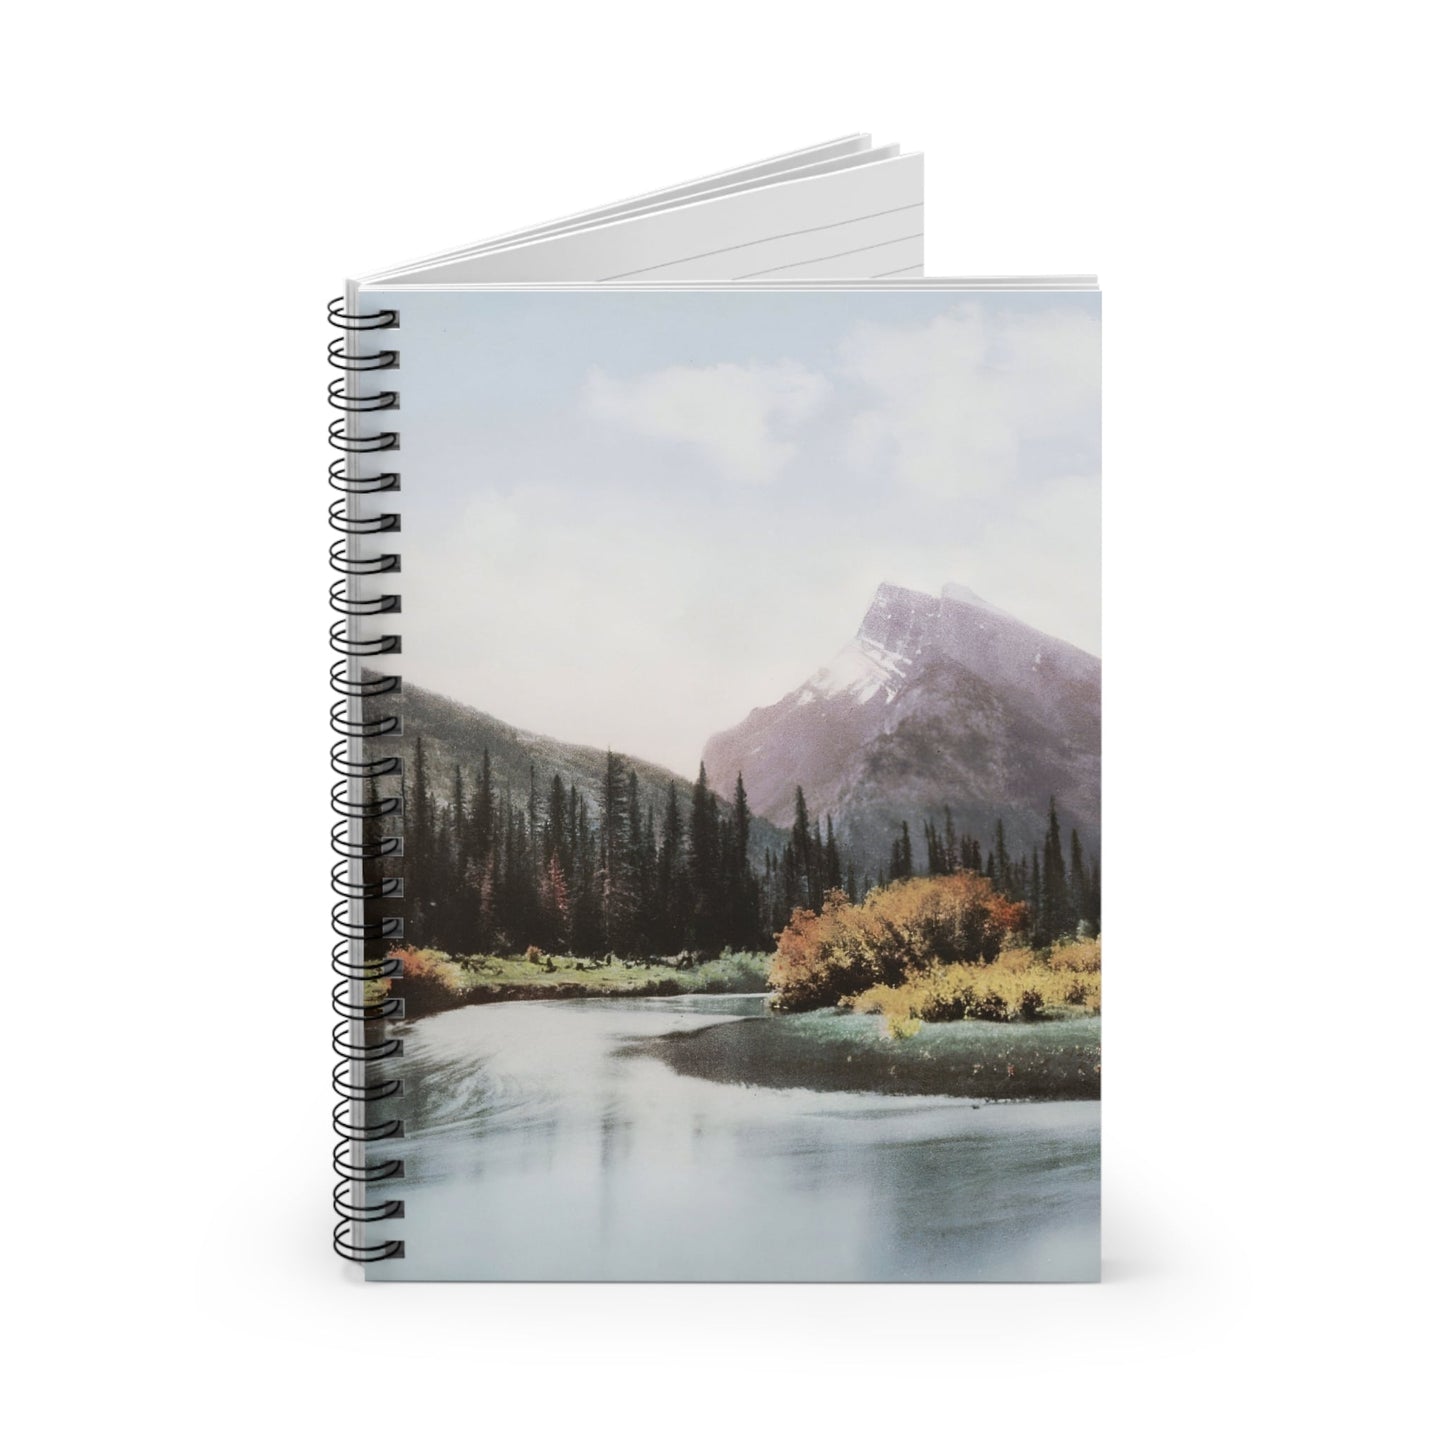 Canada Mountain Landscape Spiral Notebook Standing up on White Desk